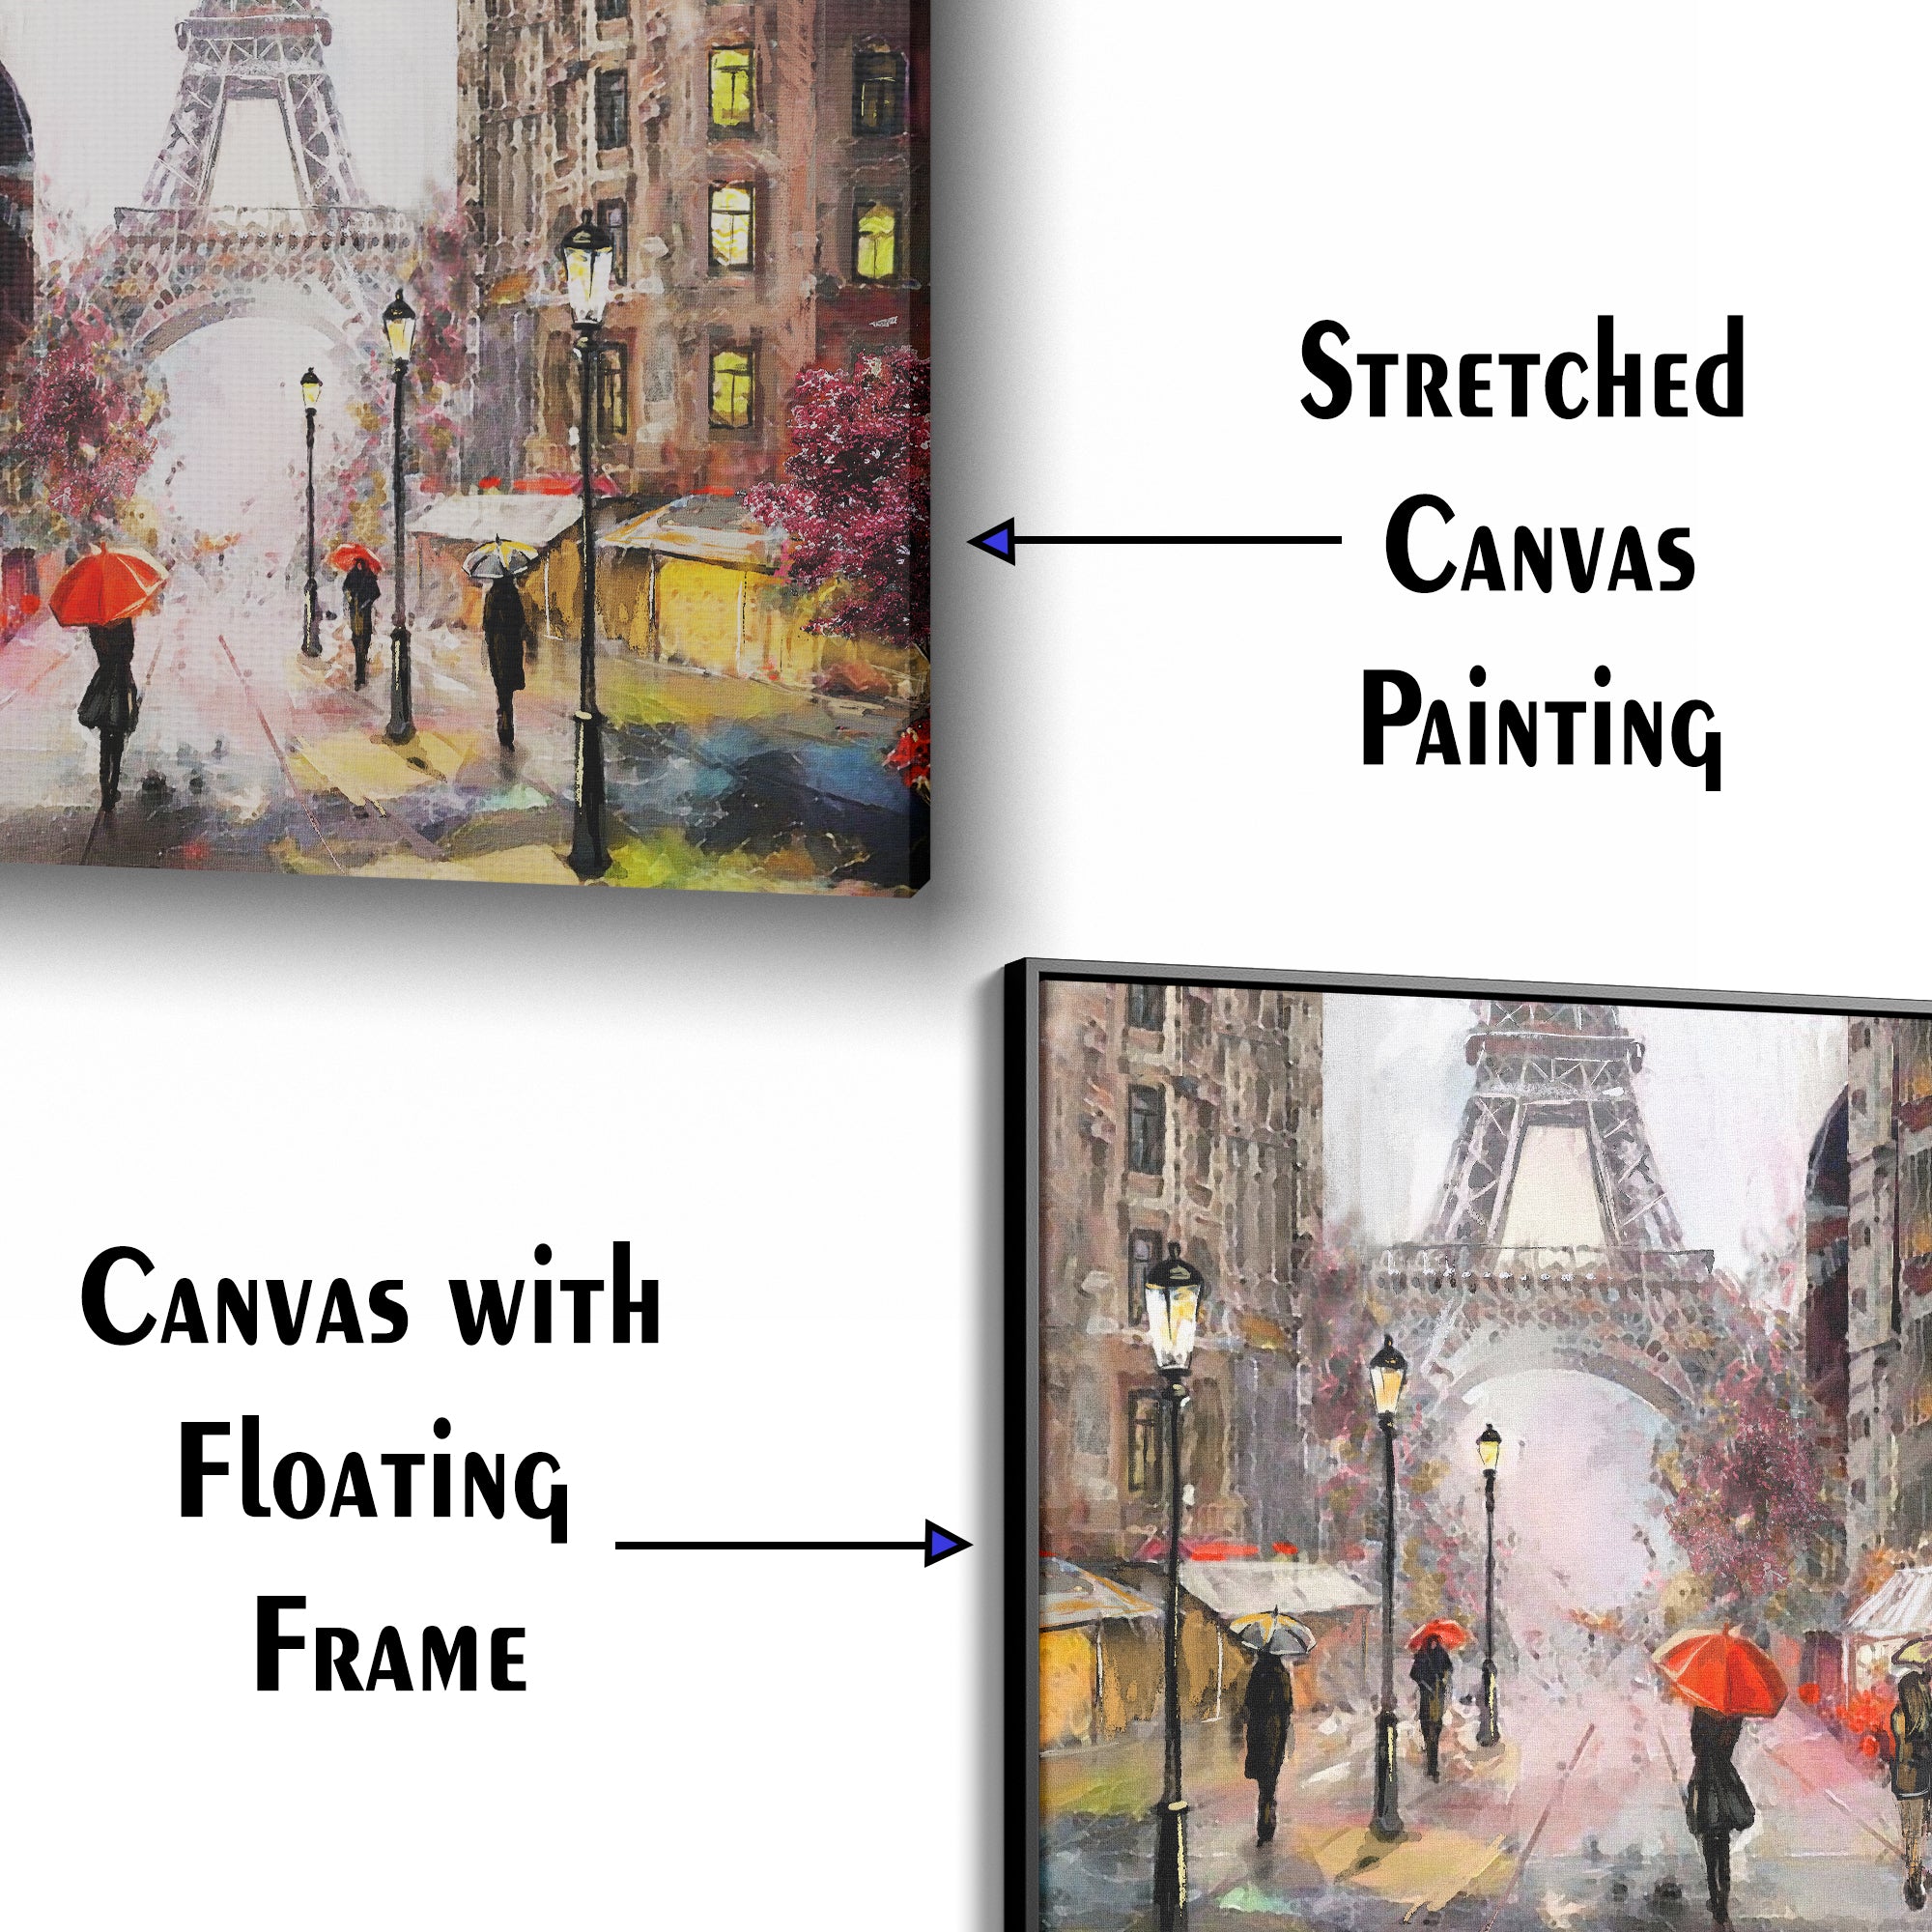 Eiffel Tower In Rain Abstract Art Wall Painting